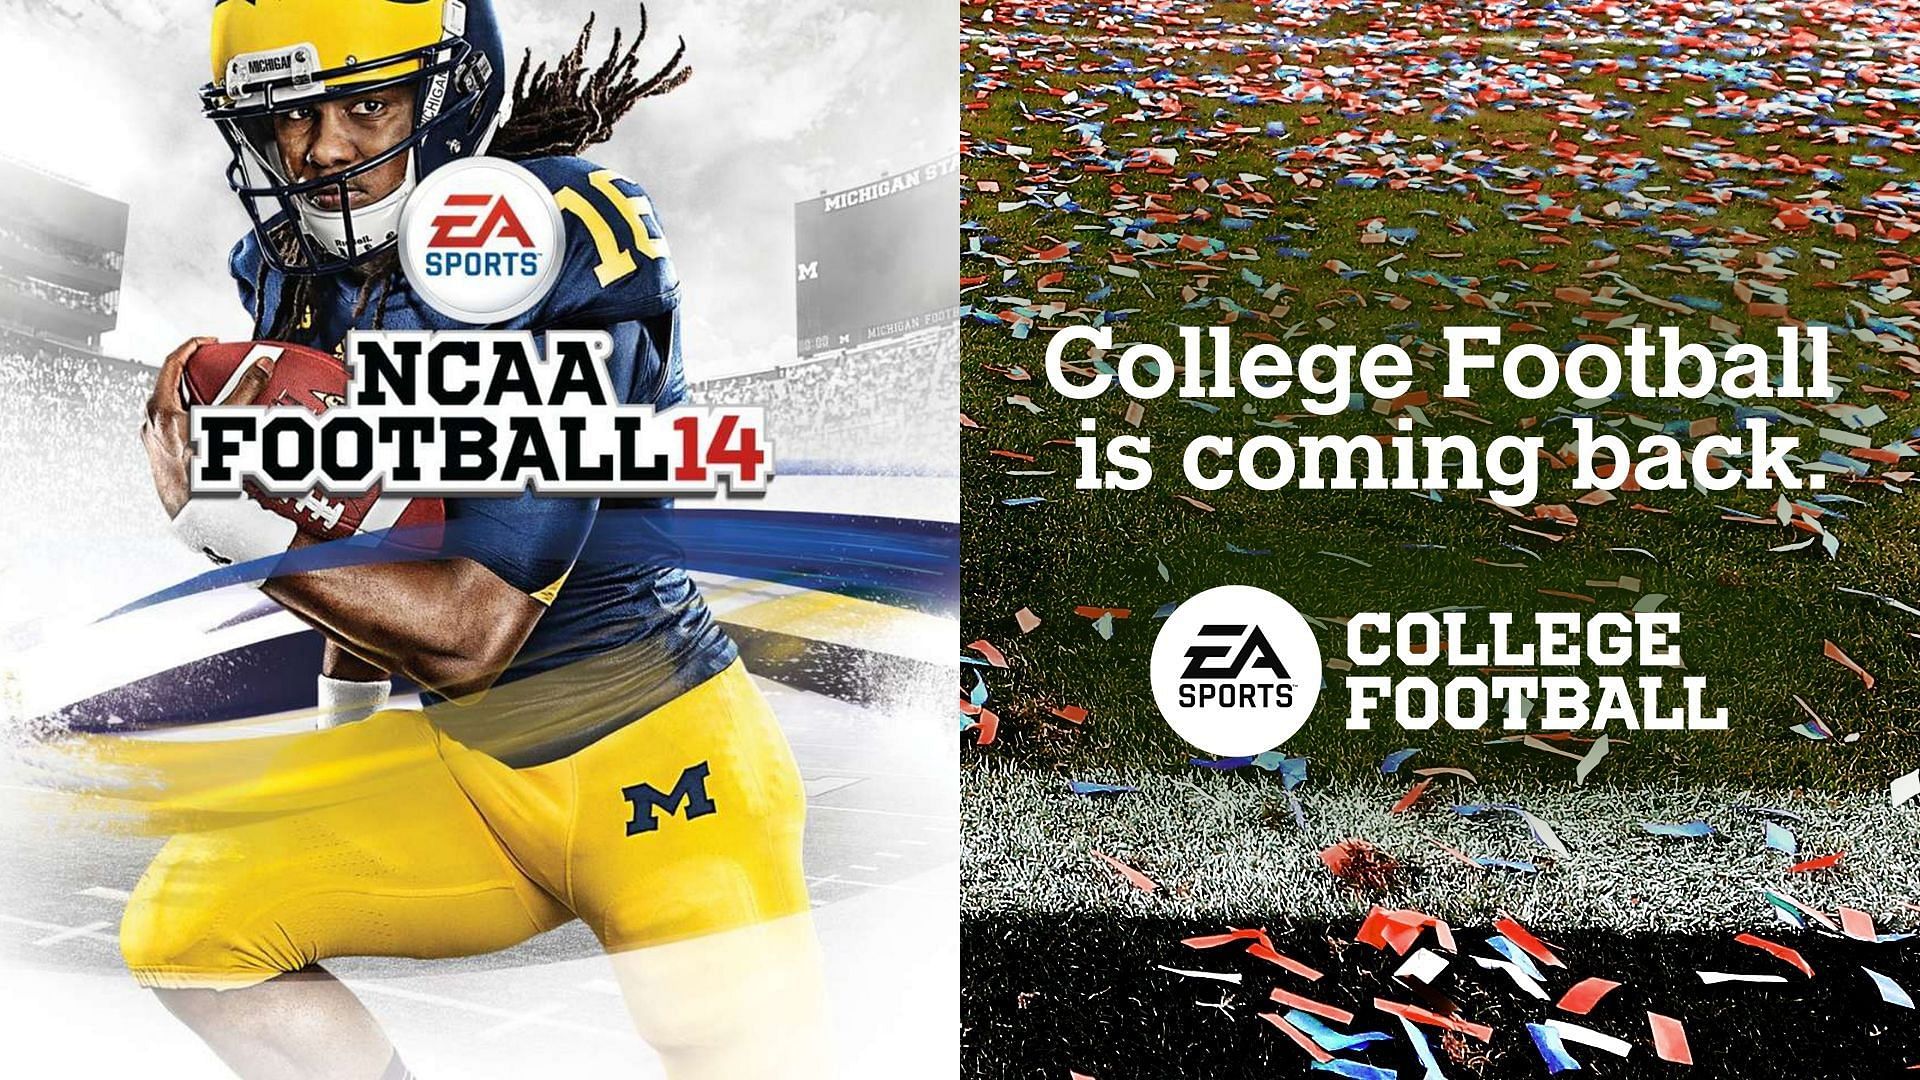 Top 10 memes on EA Sports College Football